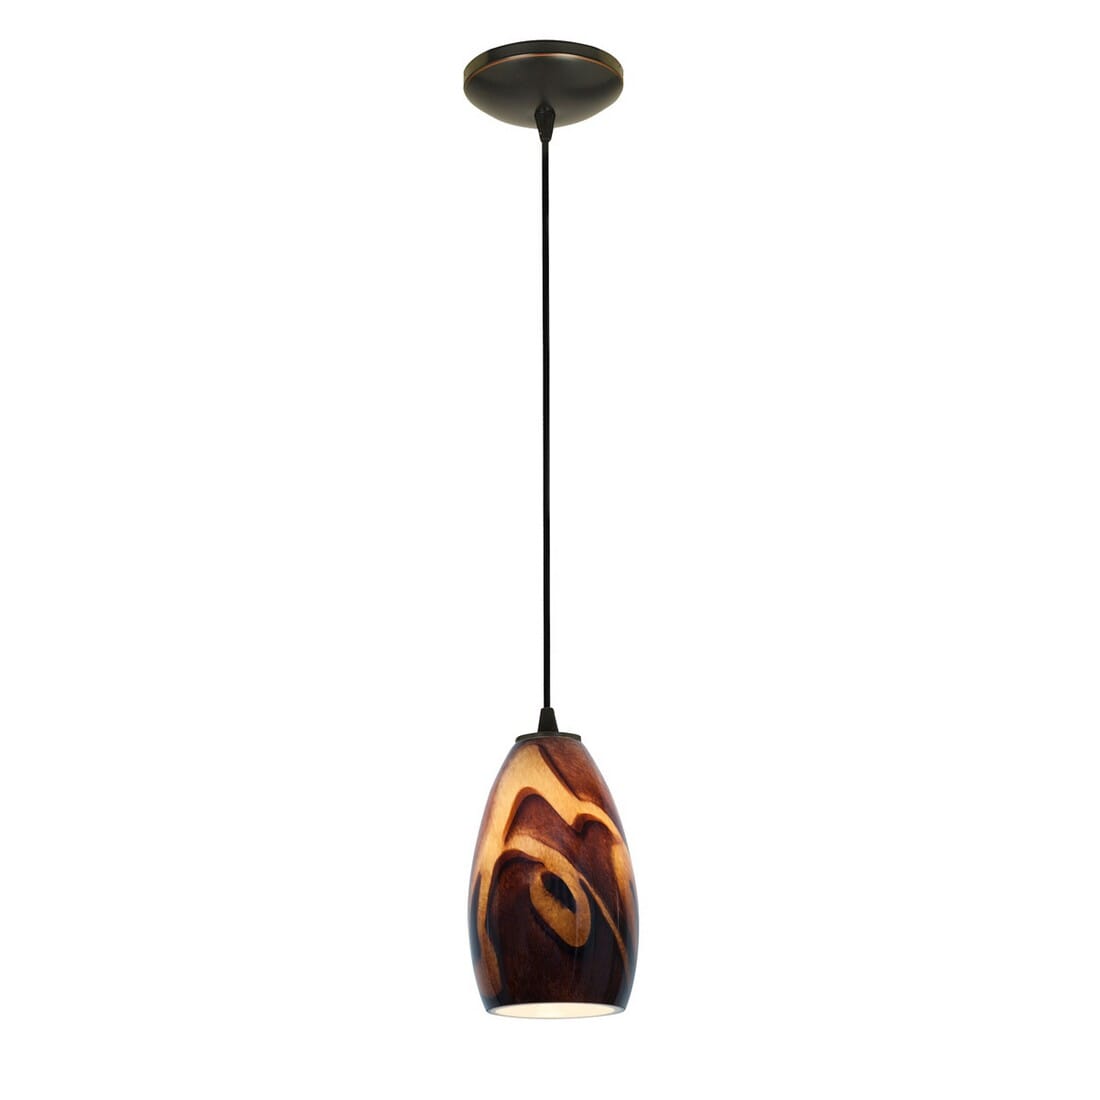 Access Champagne Pendant Light in Oil Rubbed Bronze -  Access Lighting, 28012-1C-ORB/ICA